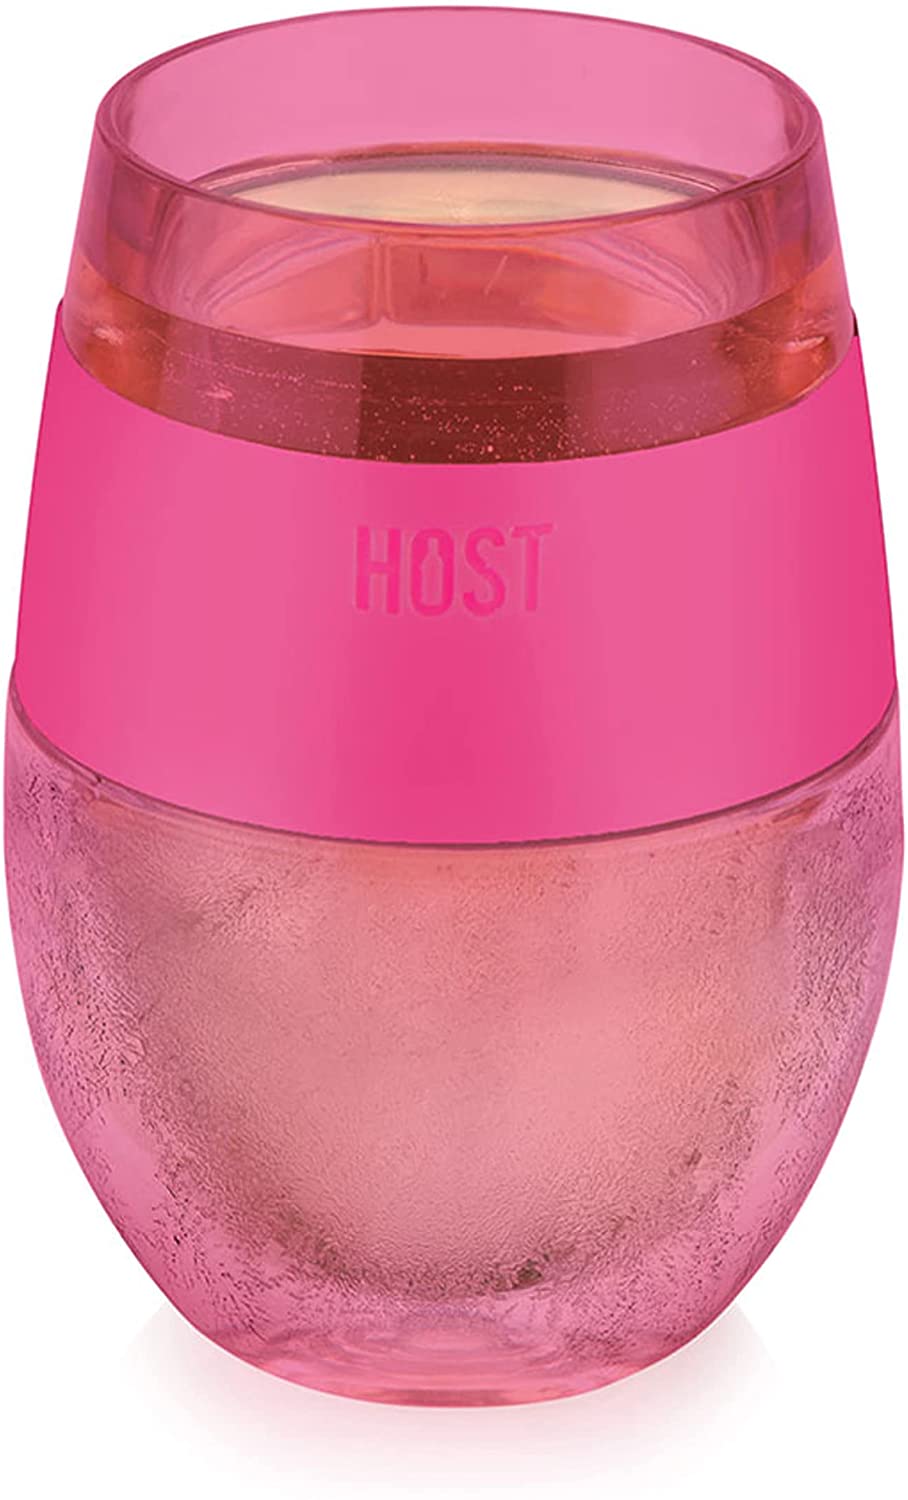 True Brands Host Freeze Wine Cooling Cup PaleVioletRed